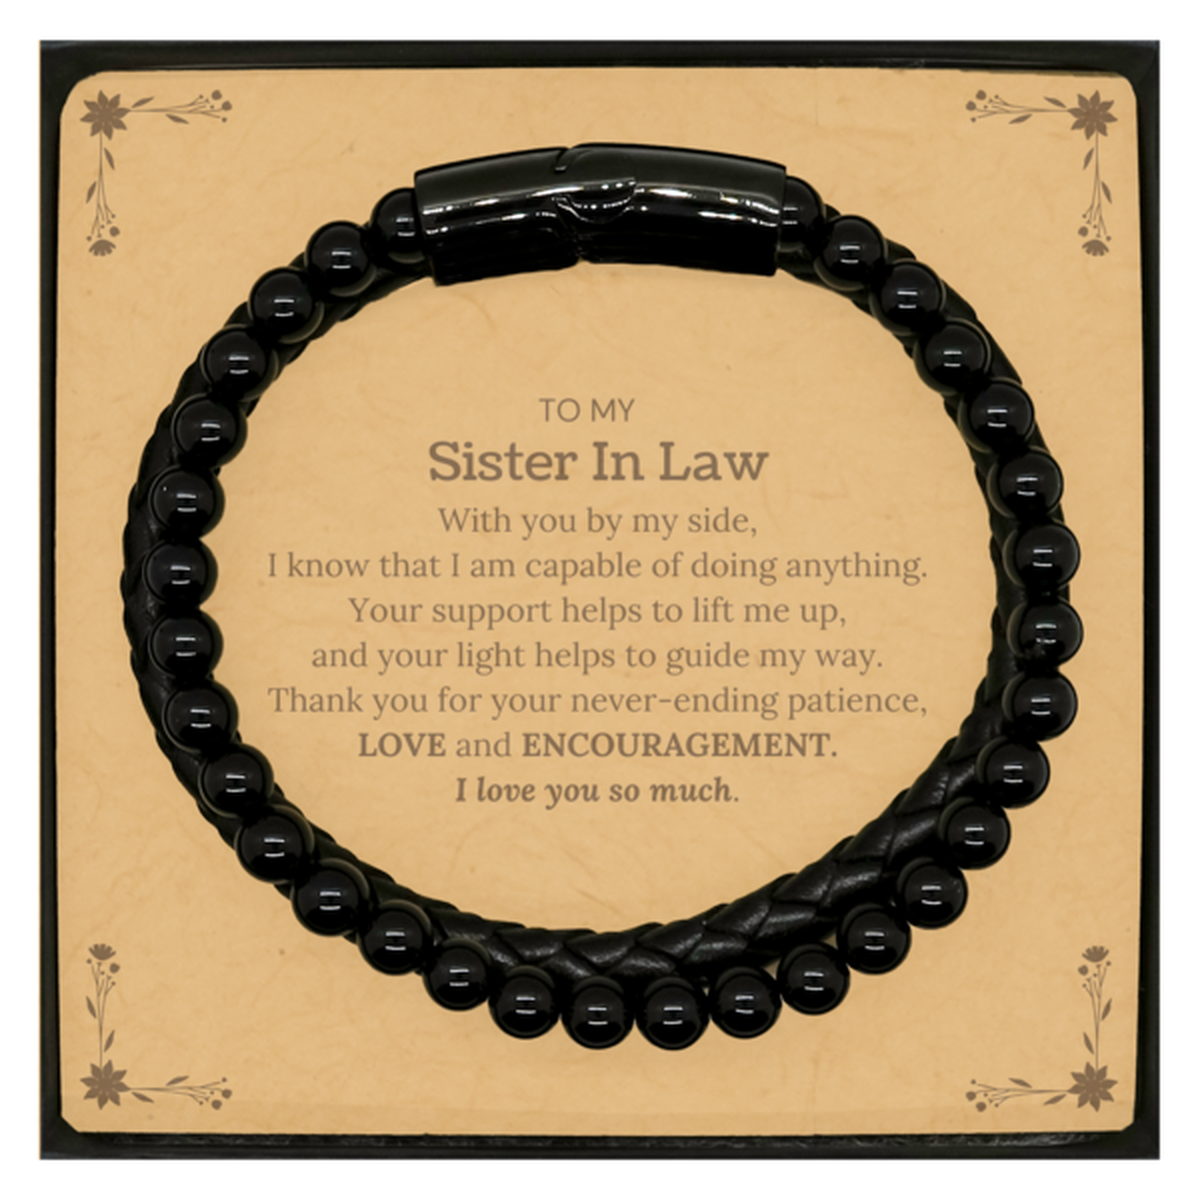 Appreciation Sister In Law Stone Leather Bracelets Gifts, To My Sister In Law Birthday Christmas Wedding Keepsake Gifts for Sister In Law With you by my side, I know that I am capable of doing anything. I love you so much